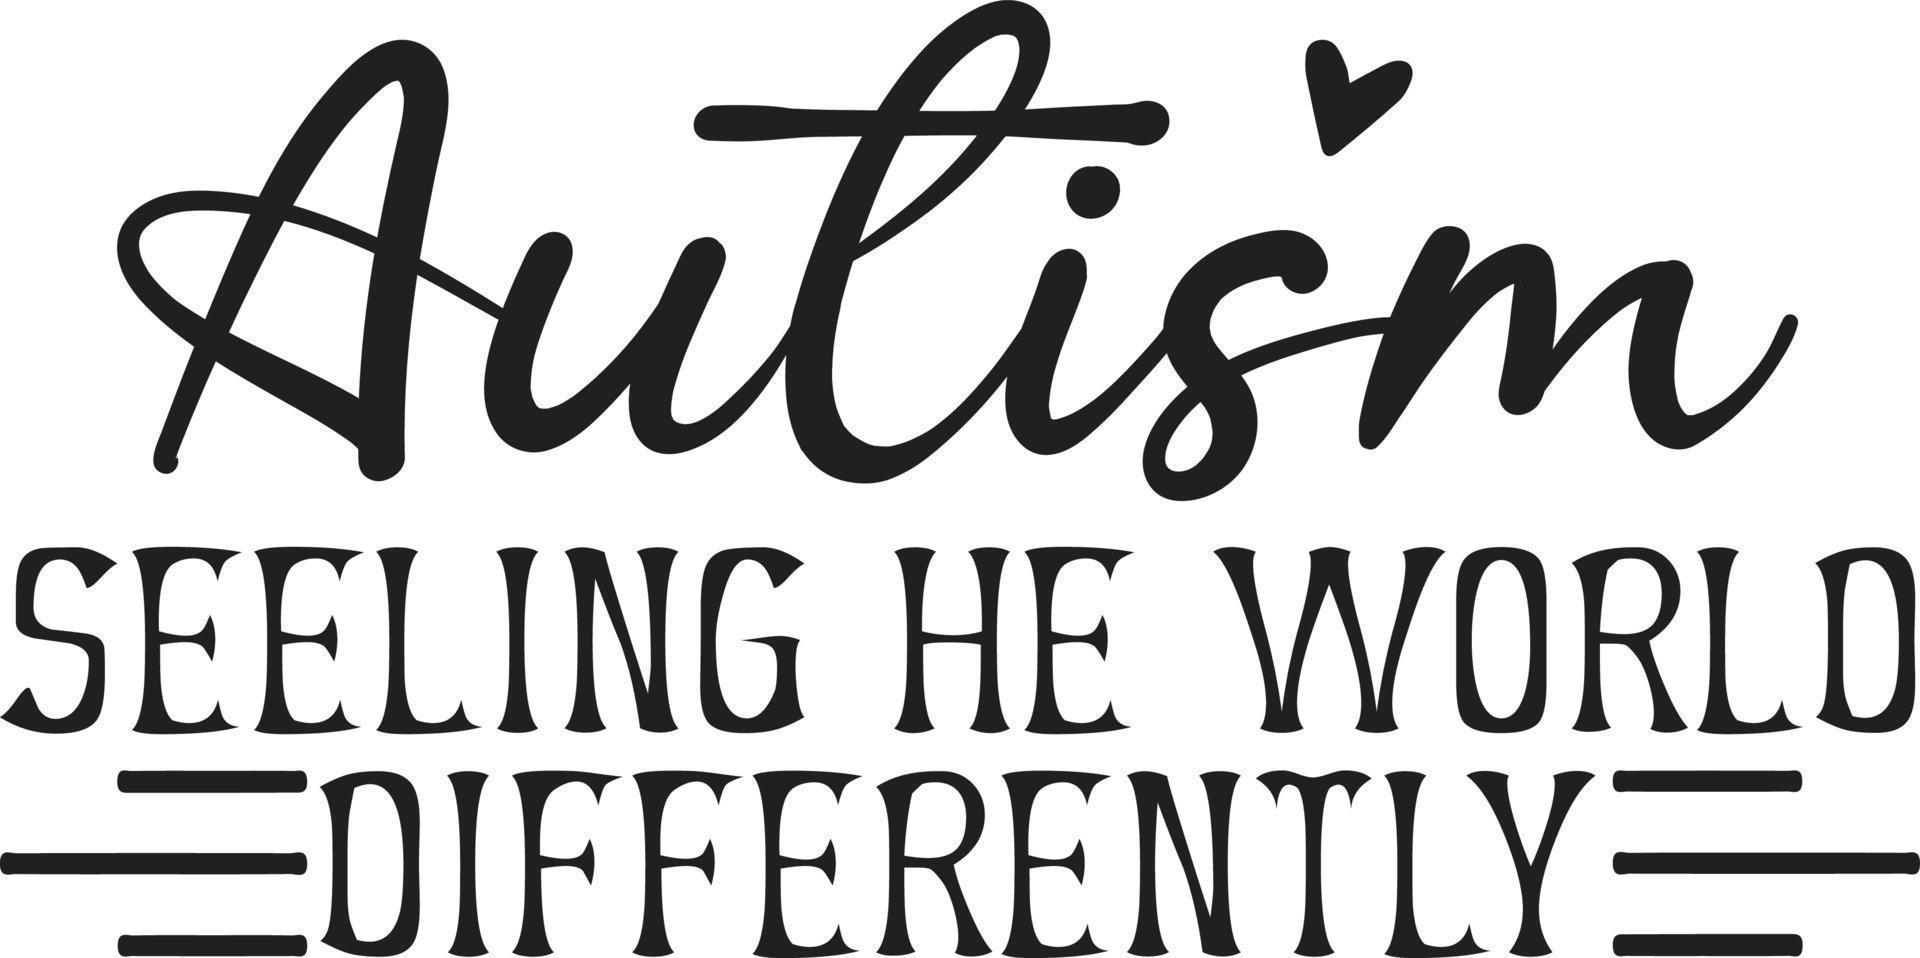 Autism Seeling he World Differently vector